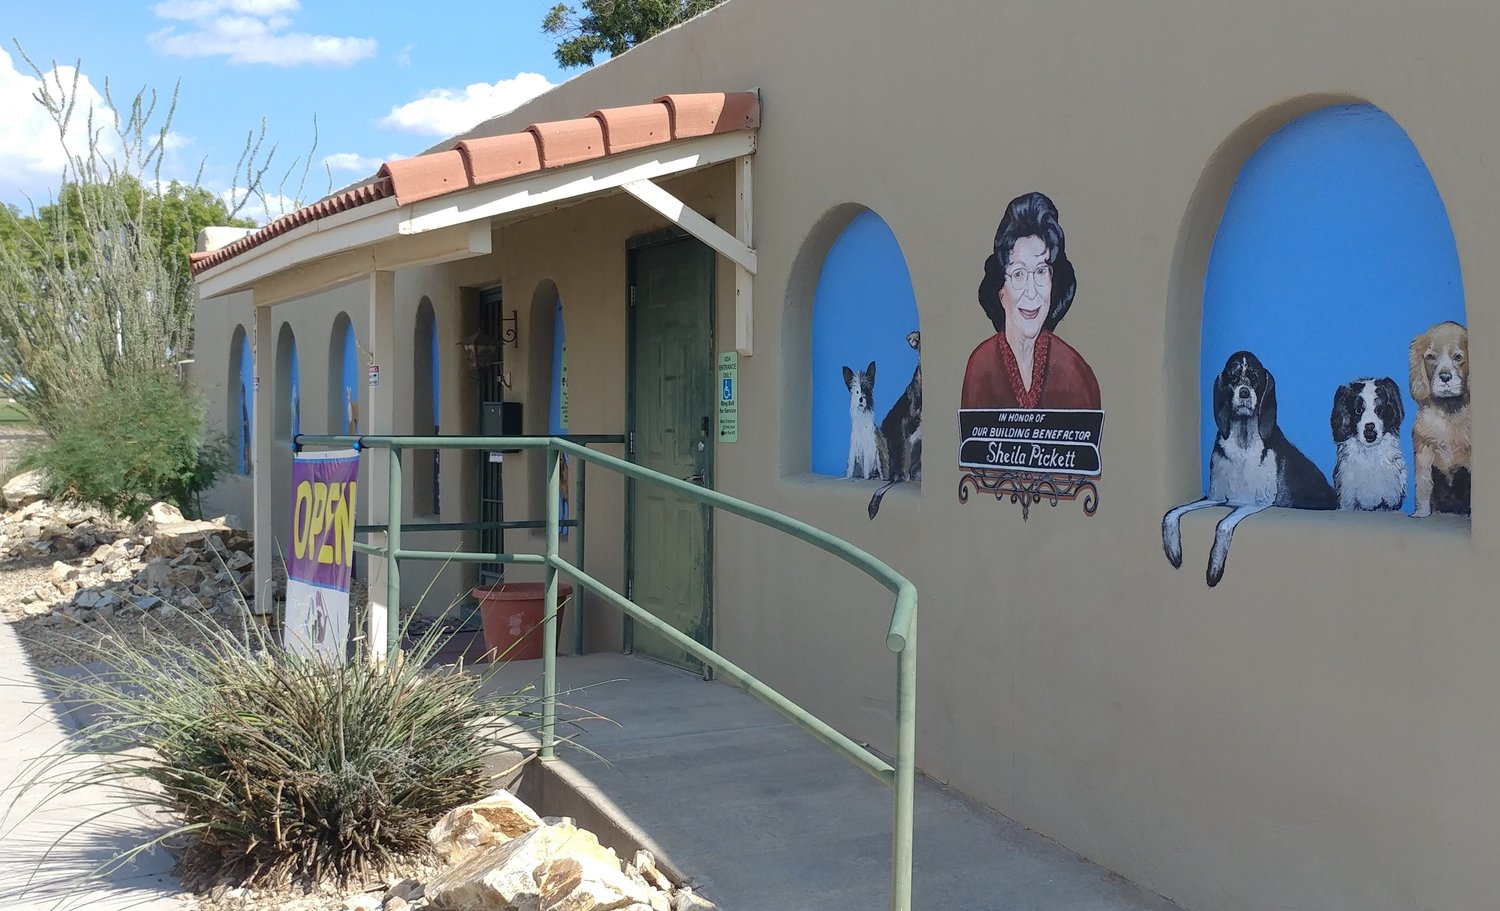 ACTion Programs for Animals new adoption center at 537 N. Solano Drive features a mural honoring its benefactor, Sheila Pickett